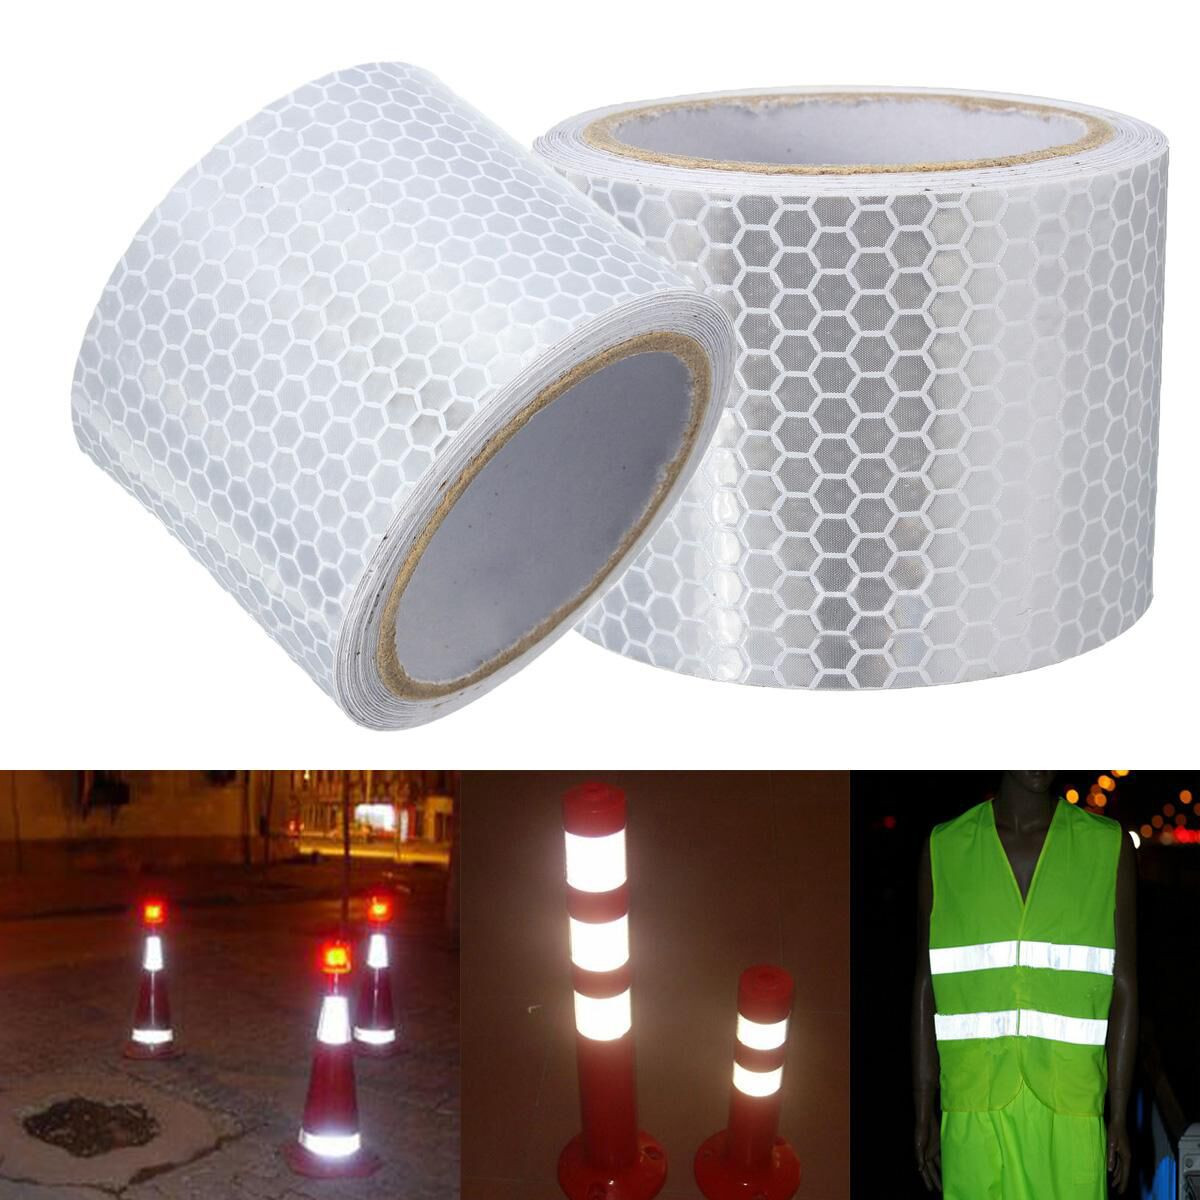 2Pcs 3M Car Truck Reflective Safety Warning Conspicuity Roll Tape Film Stickers 